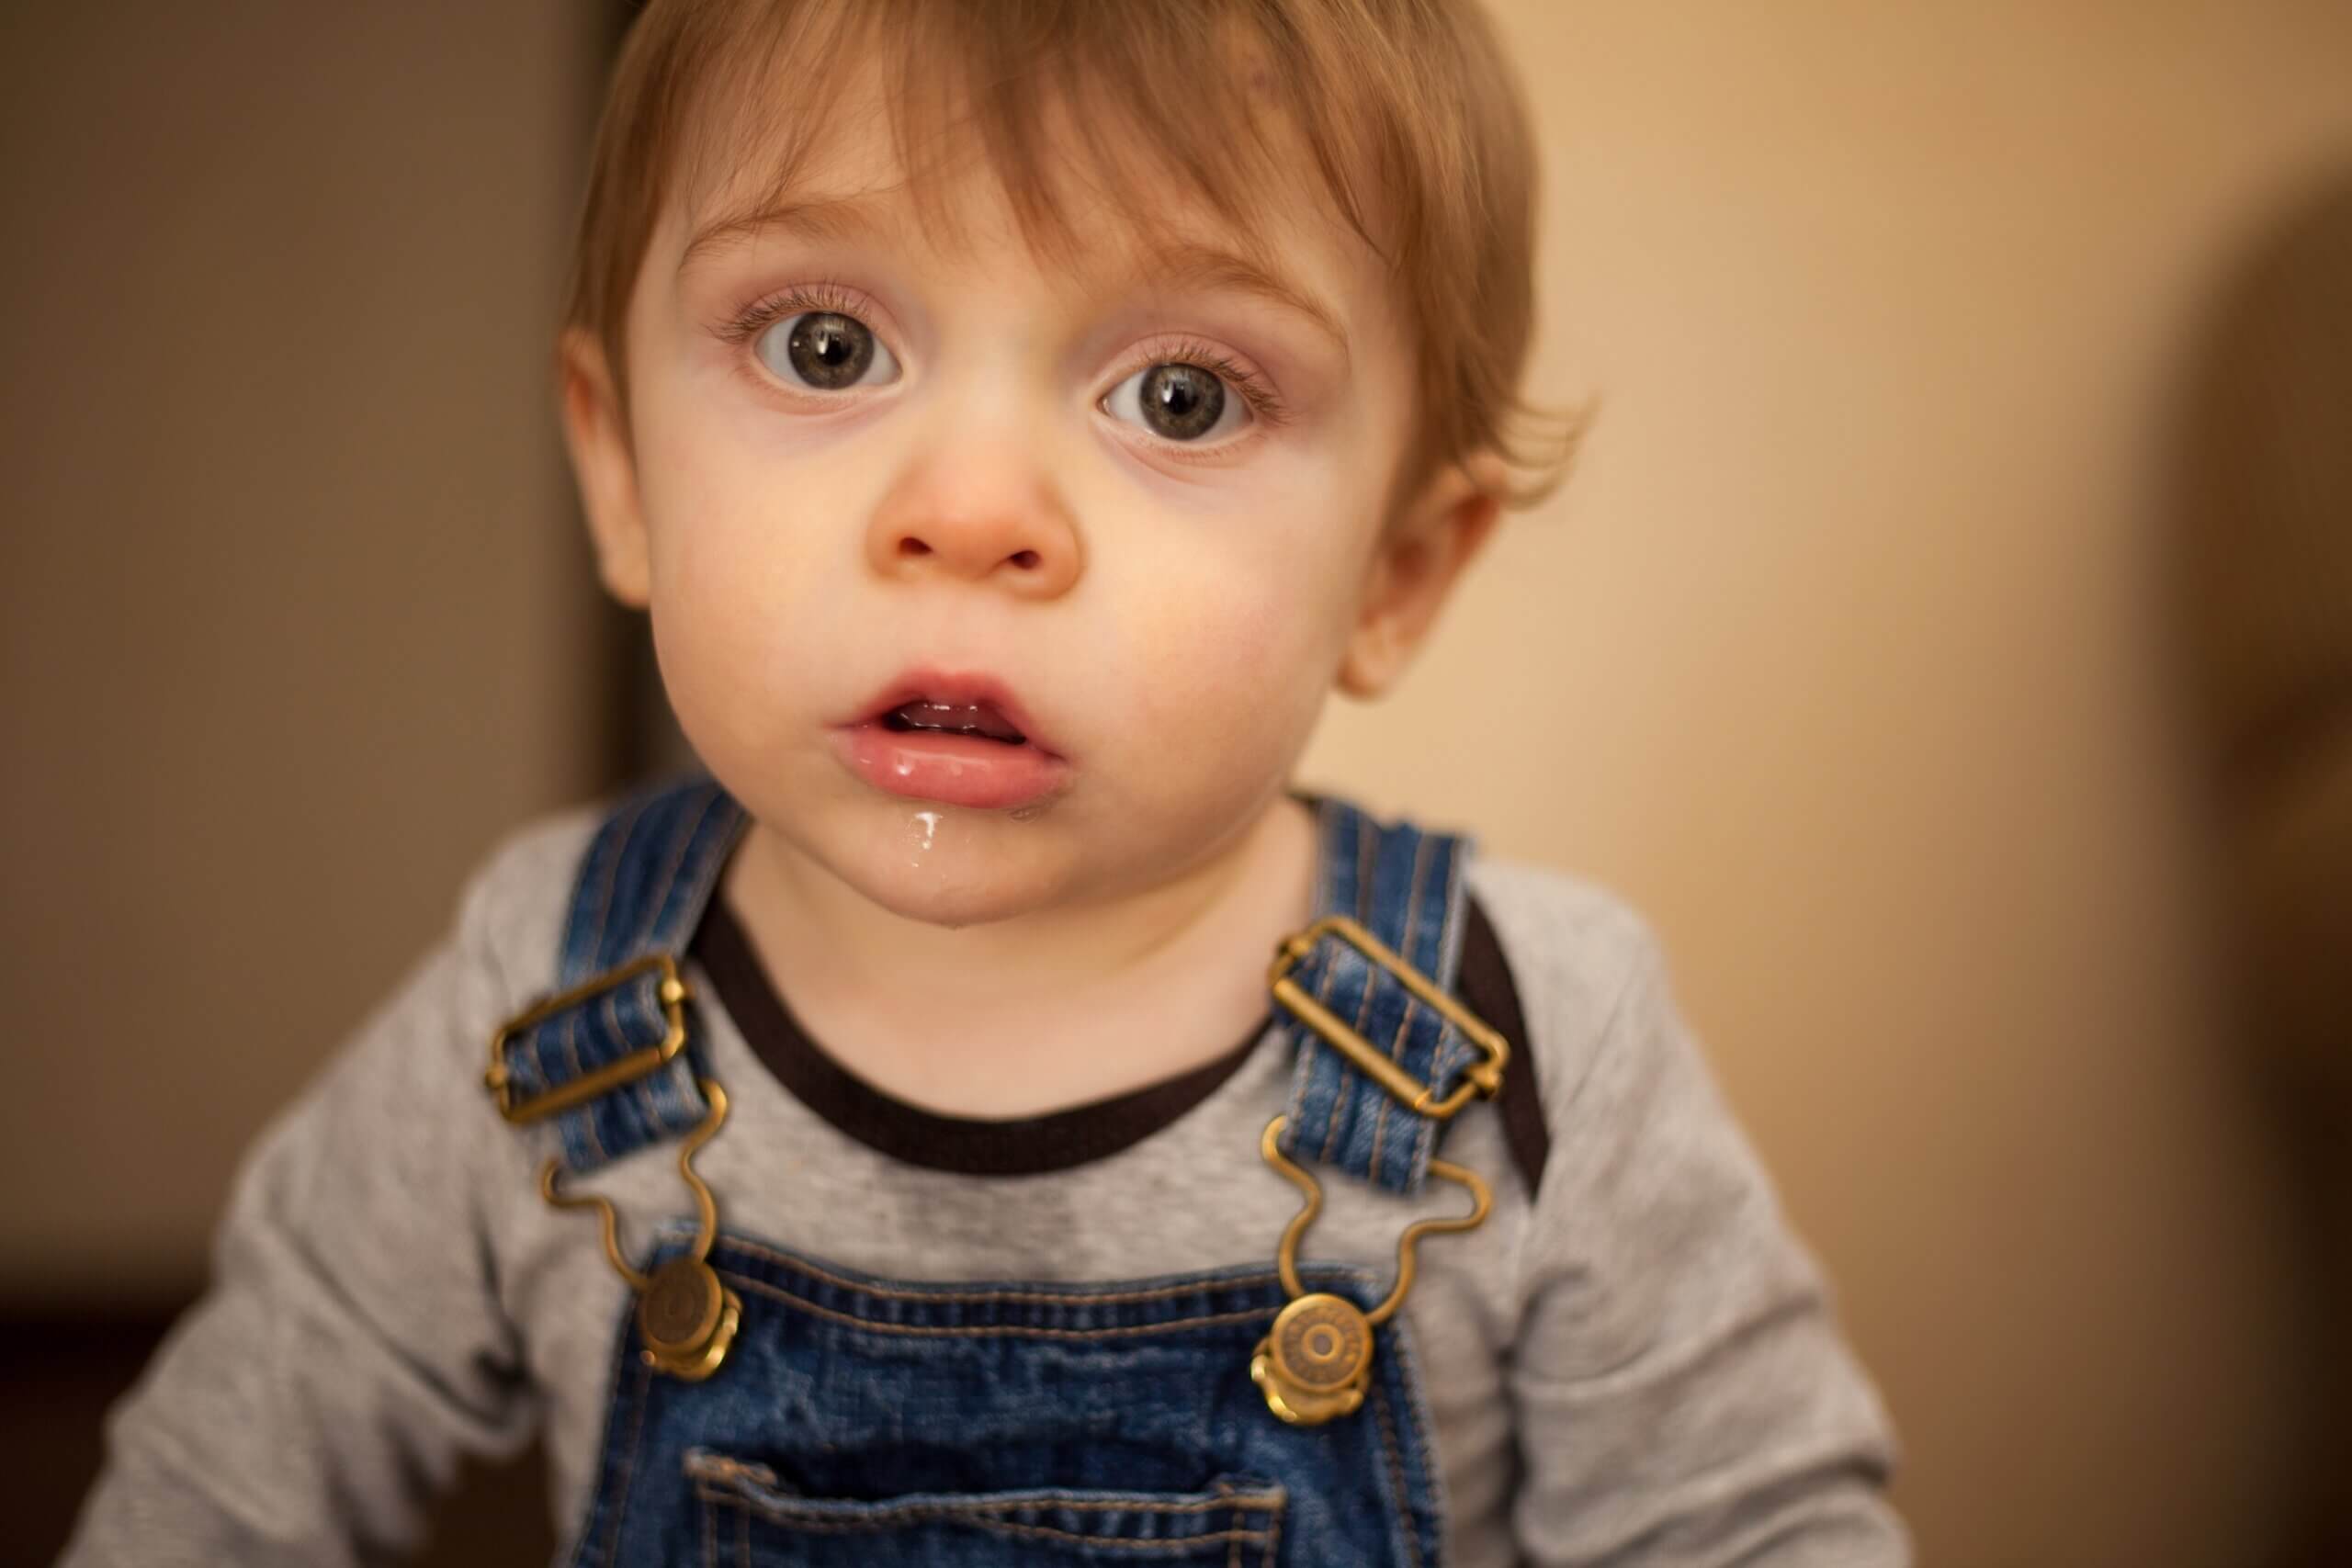 A drooling toddler.